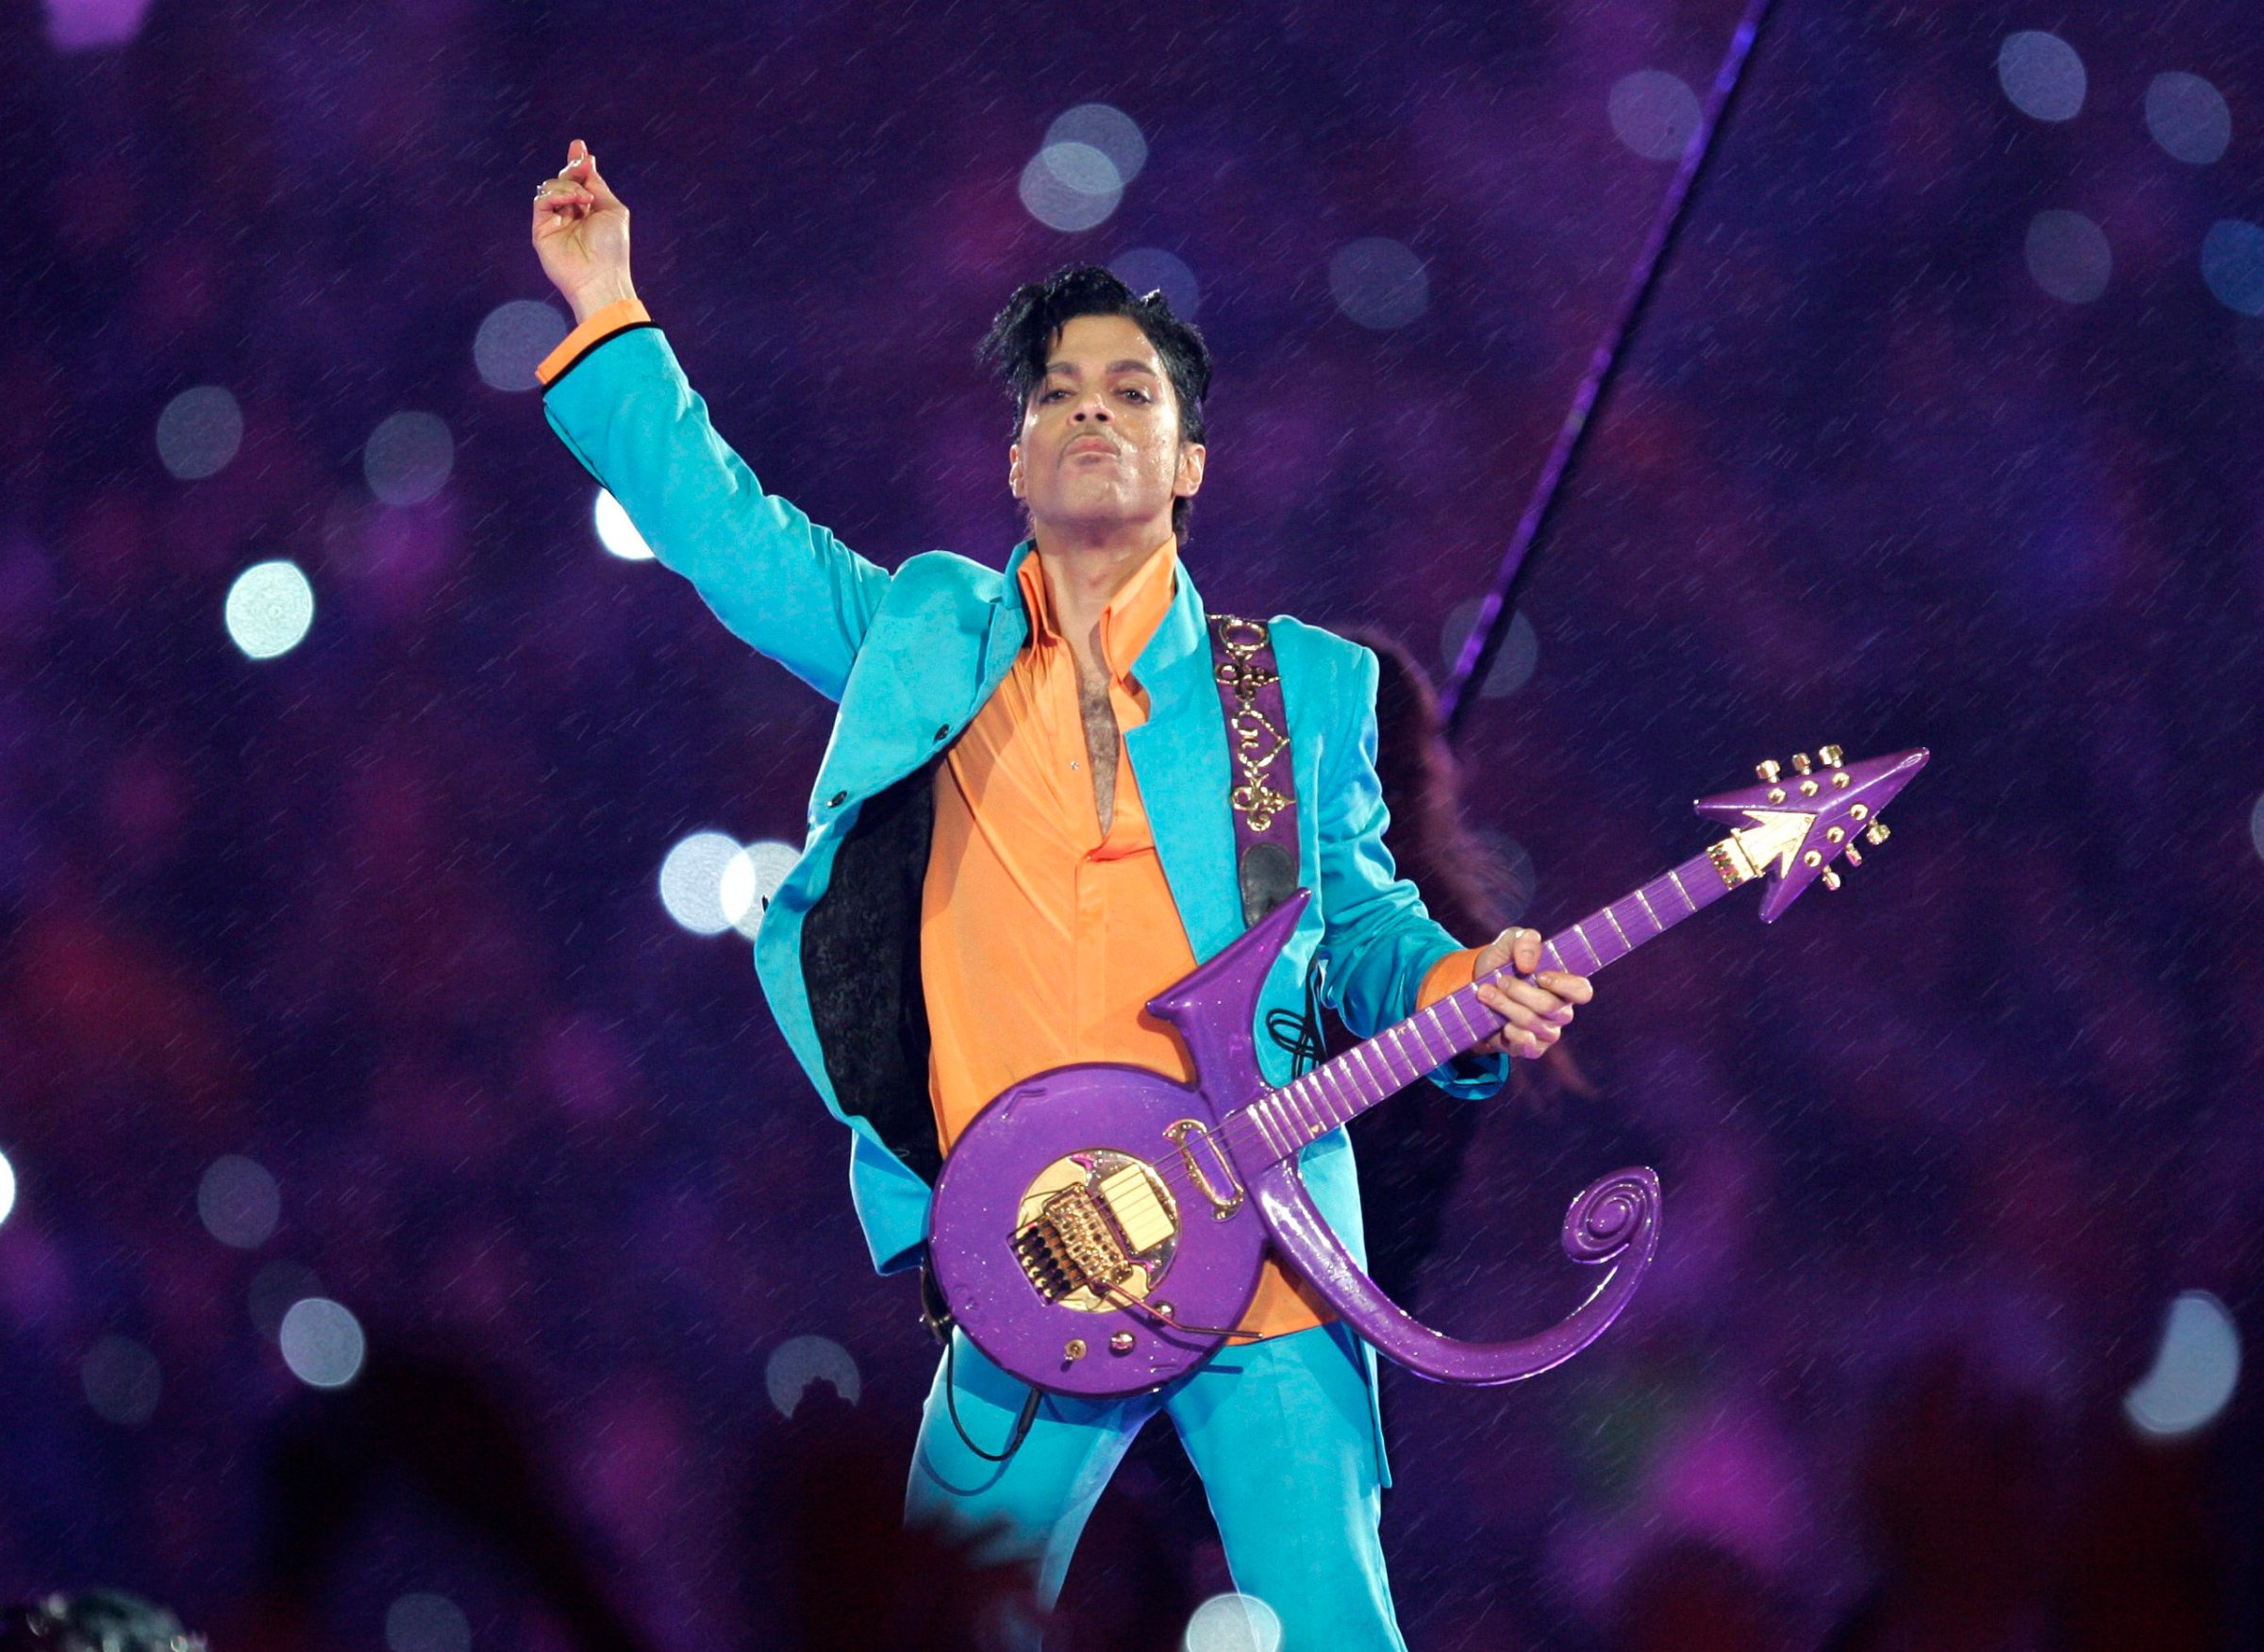 Prince performs during the halftime show at the Super Bowl XLI football game at Dolphin Stadium in Miami, Feb. 4, 2007.